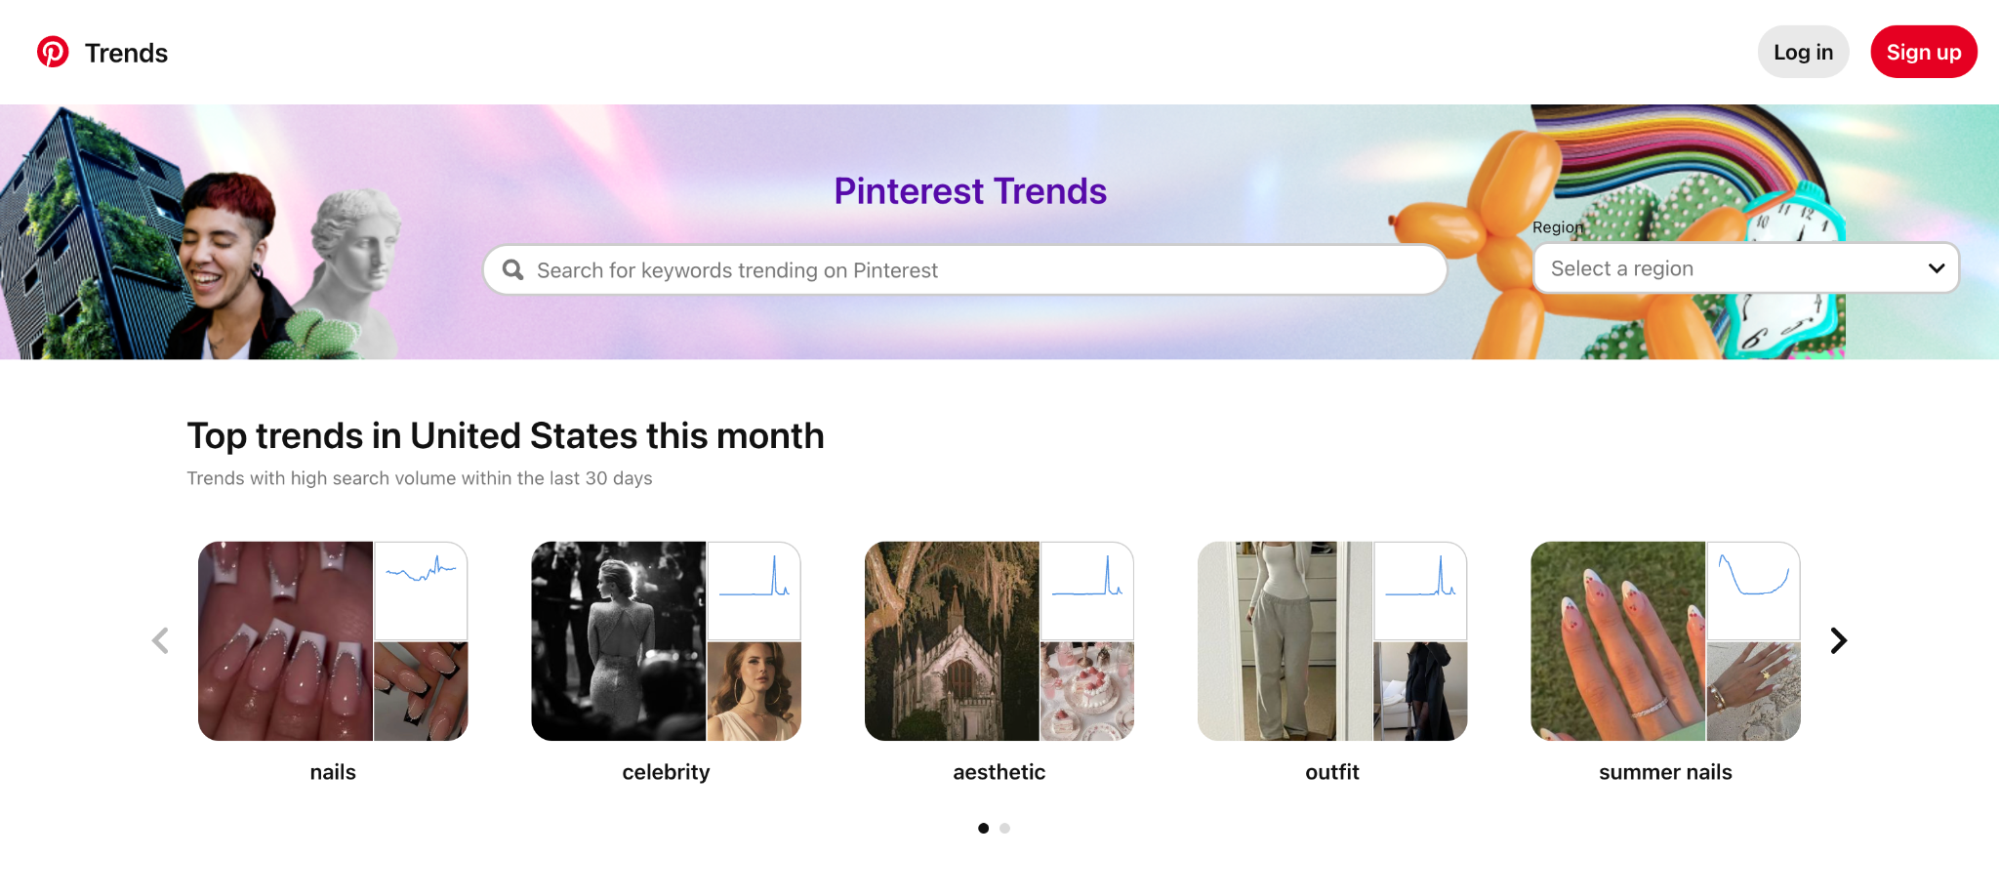 Pinterest Trends shows fall fashion, nails, and outfit ideas are the most-pinned topics in the past 30 days.